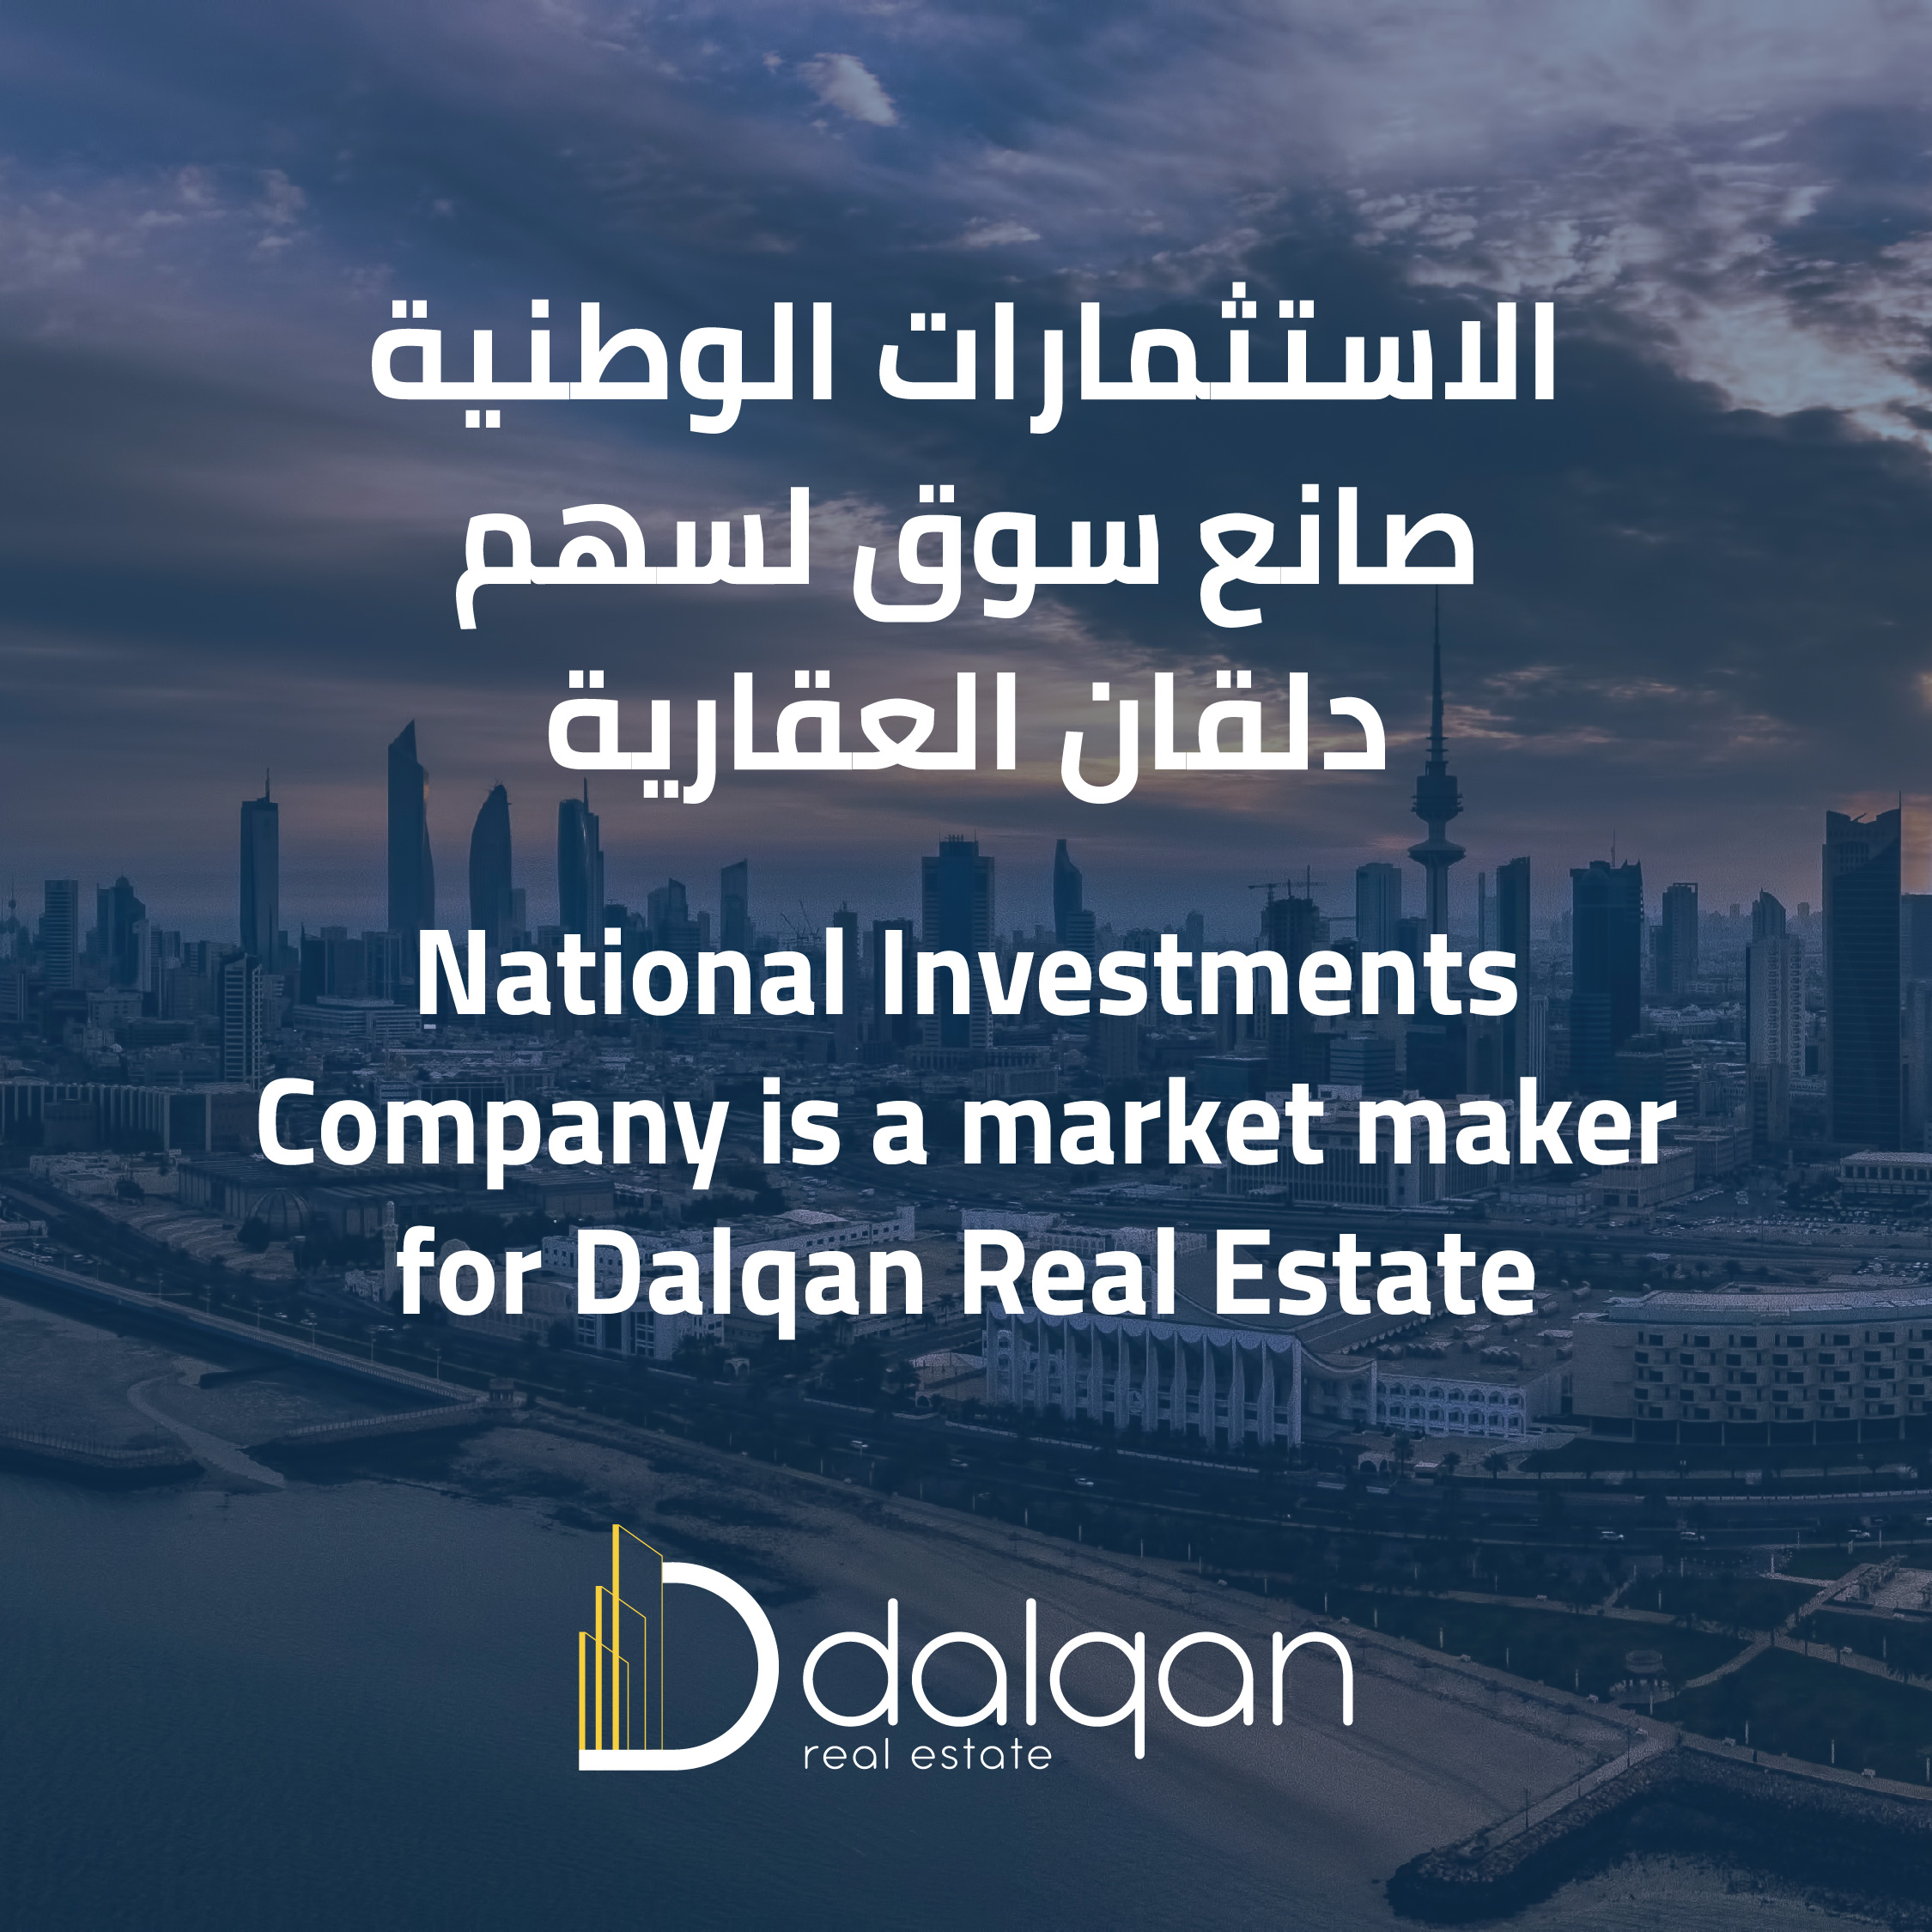 The agreement with the National Investments Company as a market maker for Dalqan Real Estate share is a qualitative step to support share stability and achieve sustainable returns for shareholders.